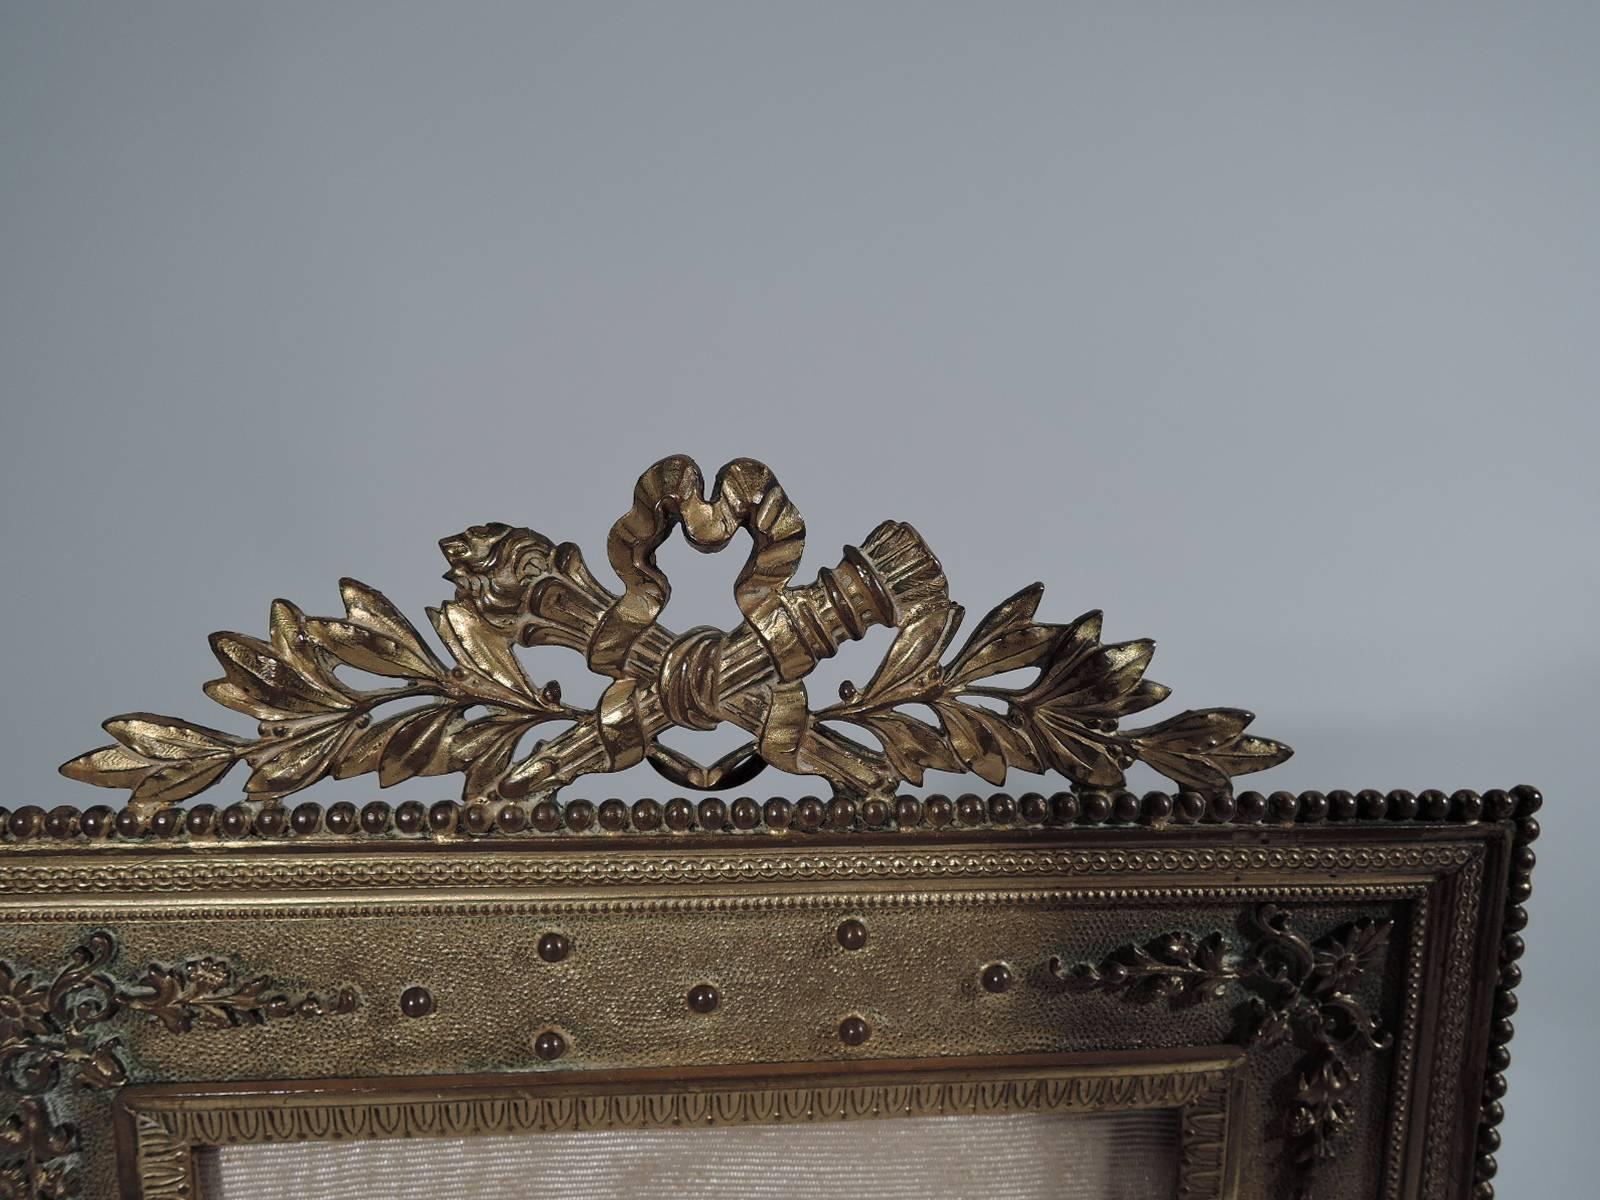 Antique French Rococo Revival gilt bronze picture frame. Rectangular window ornamented with leaf and dart, beading, guilloche, dentil, flowers and leaves. With glass, silk lining and bronze back and hinged support. Retailer’s name “Stern Brothers